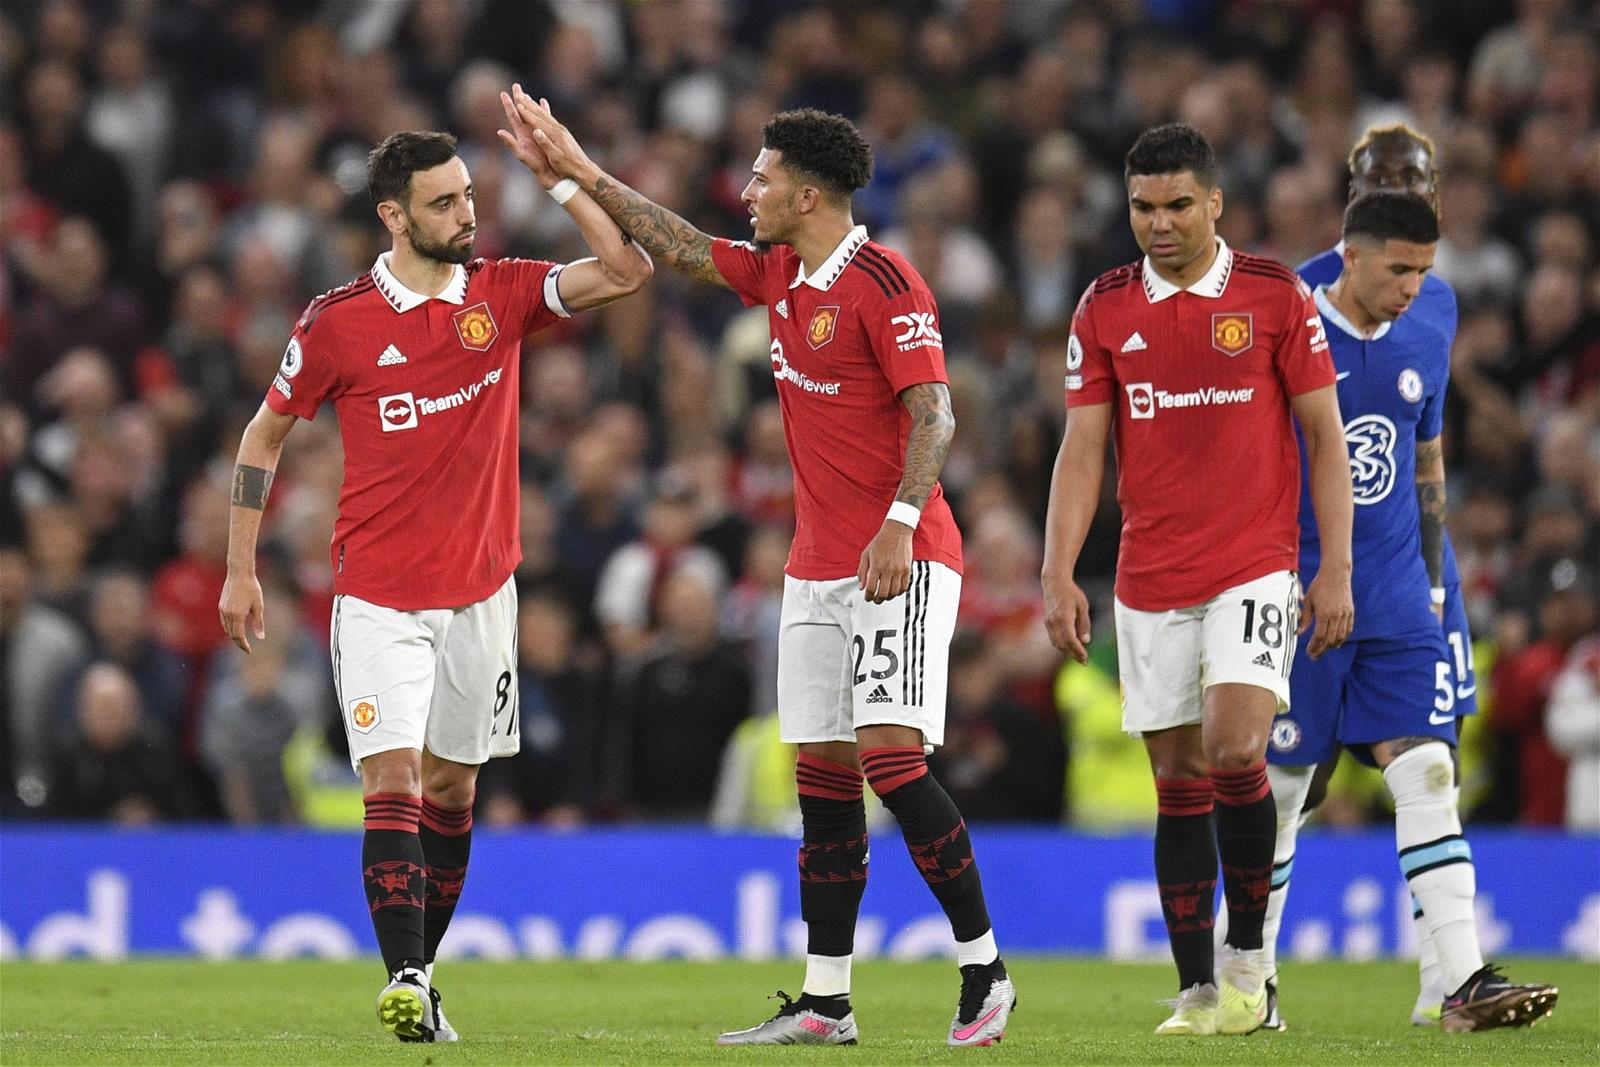 Manchester United beat Chelsea to qualify for Champions League